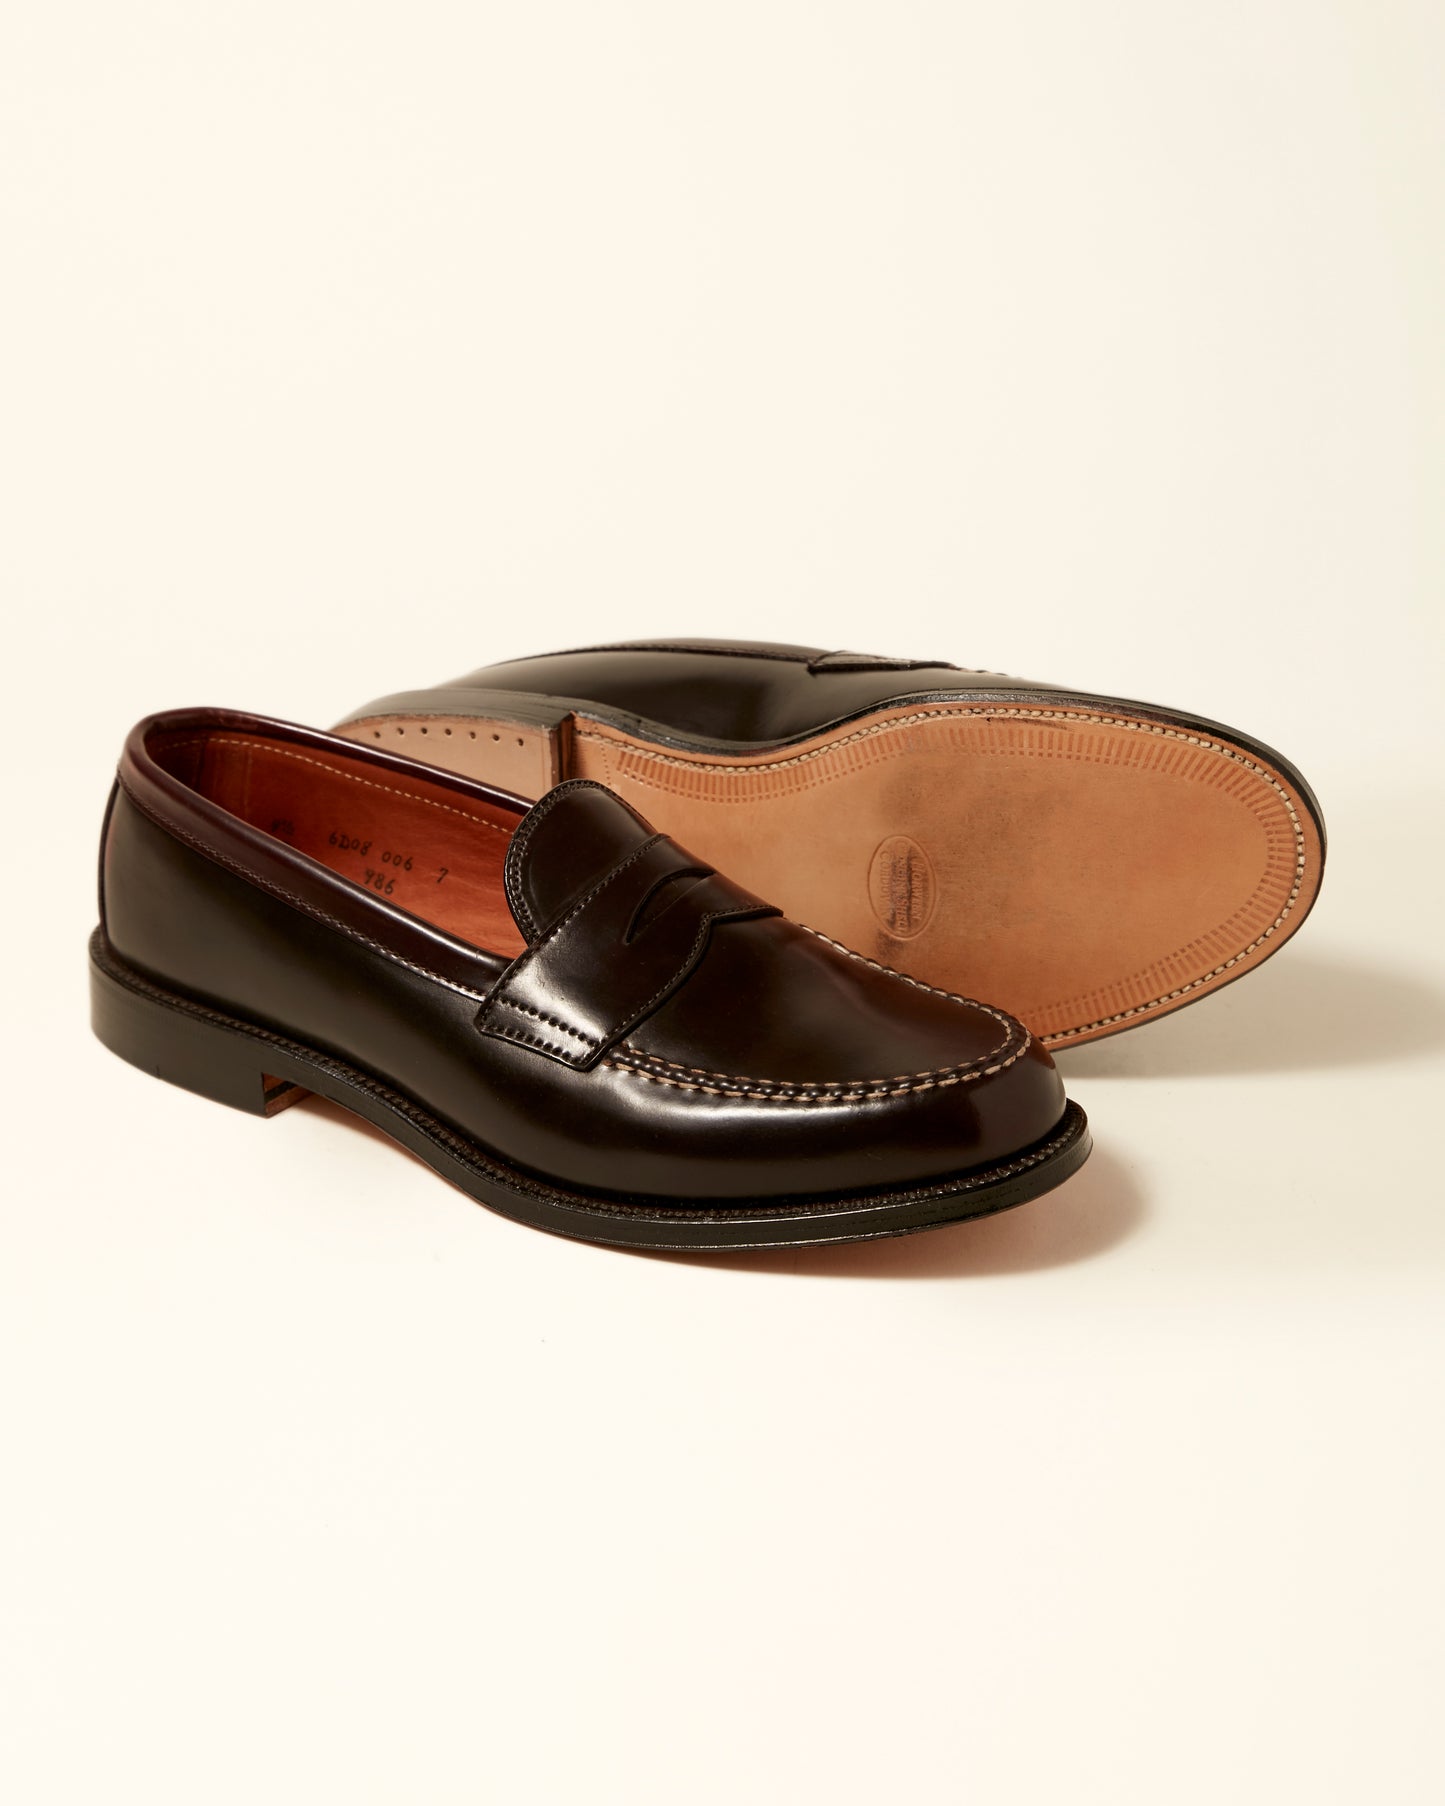 986 Color 8 Shell Cordovan Leisure Handsewn Loafer